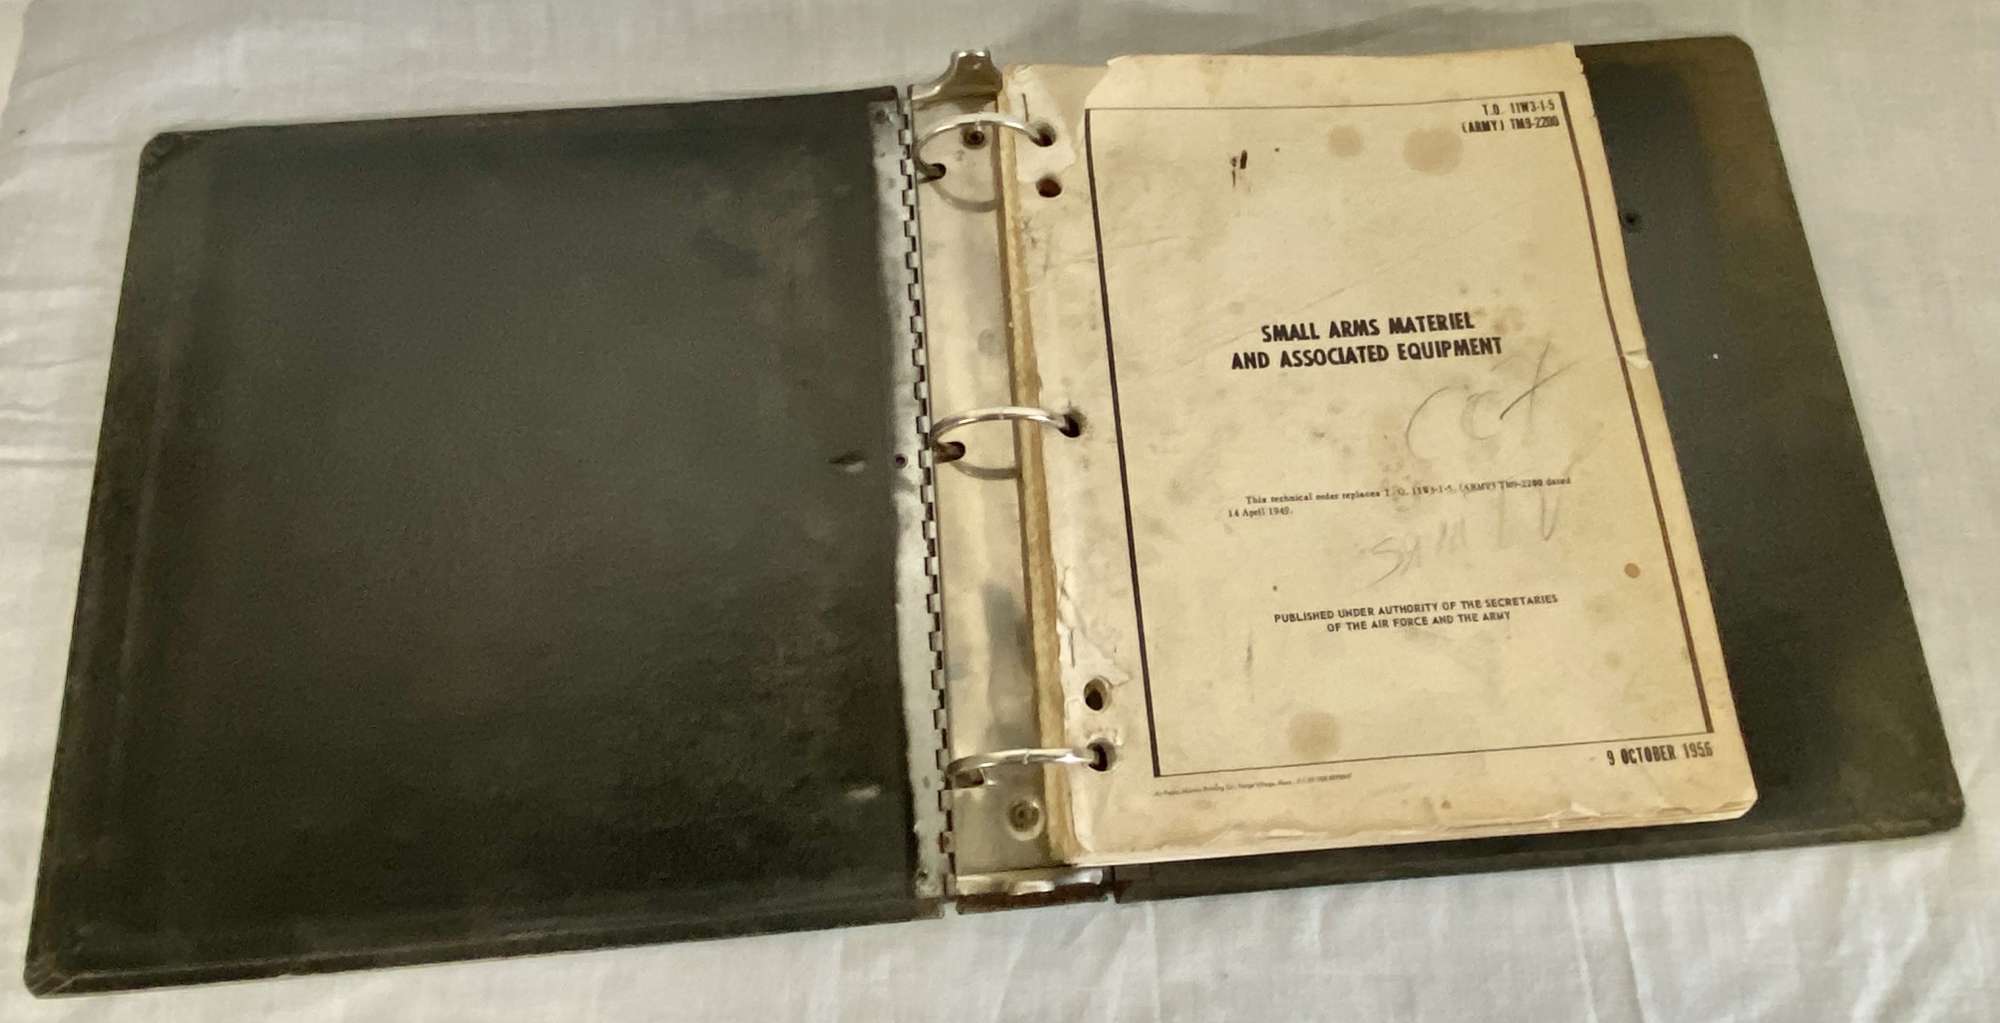 US Military Issue Small Arms Material And Associated Equipment Manual